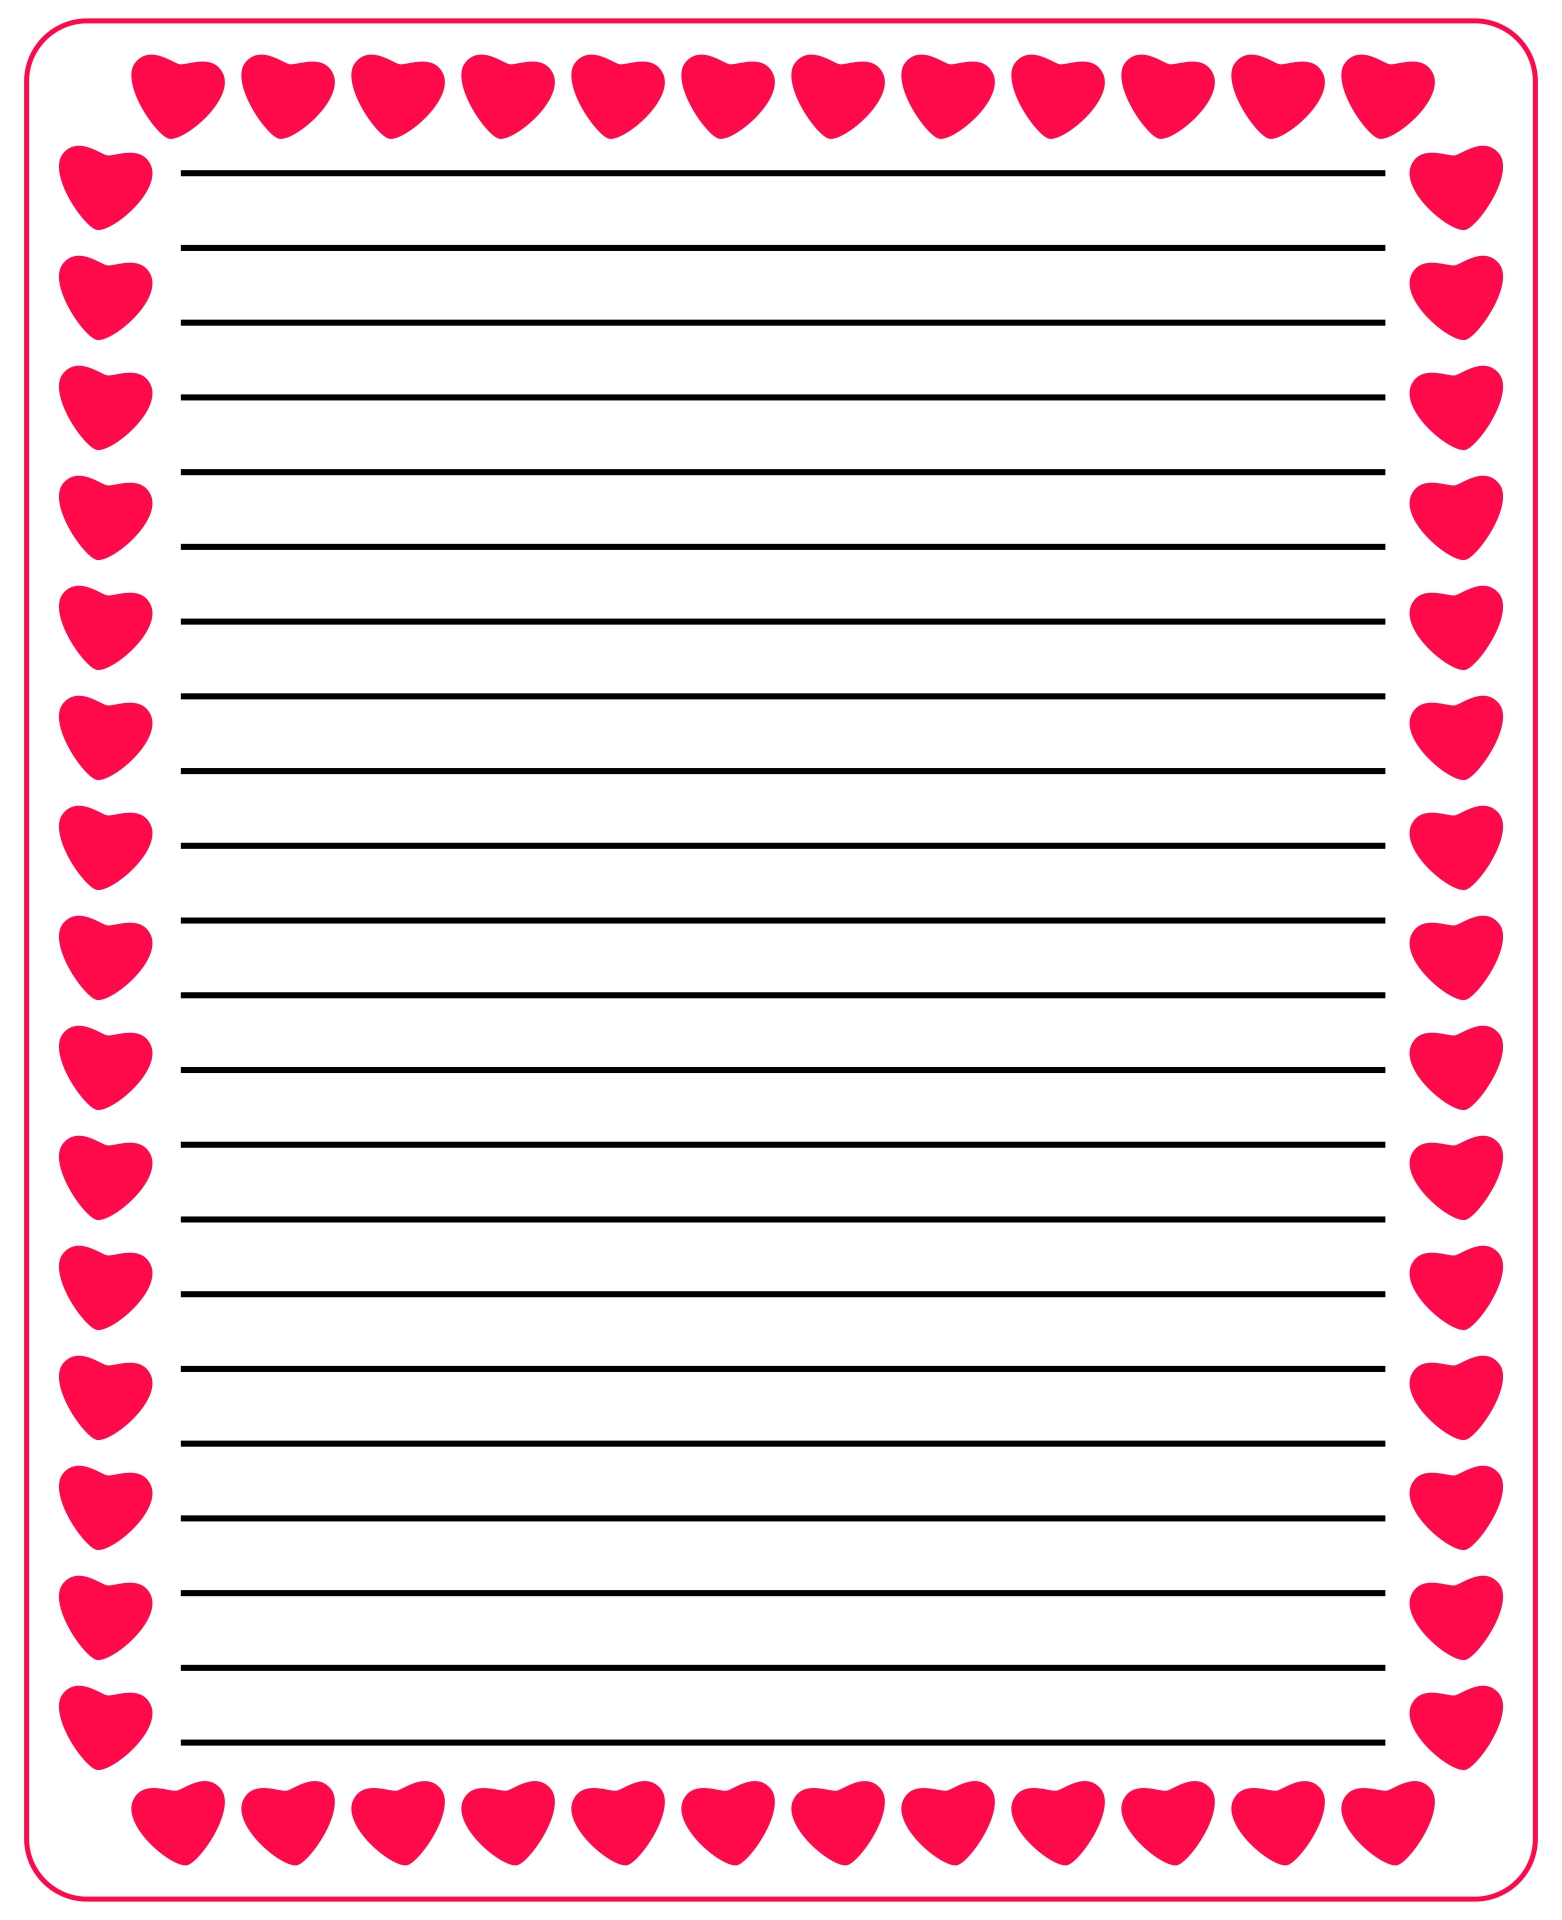 Printable Paper For Letter Writing - Get What You Need For Free